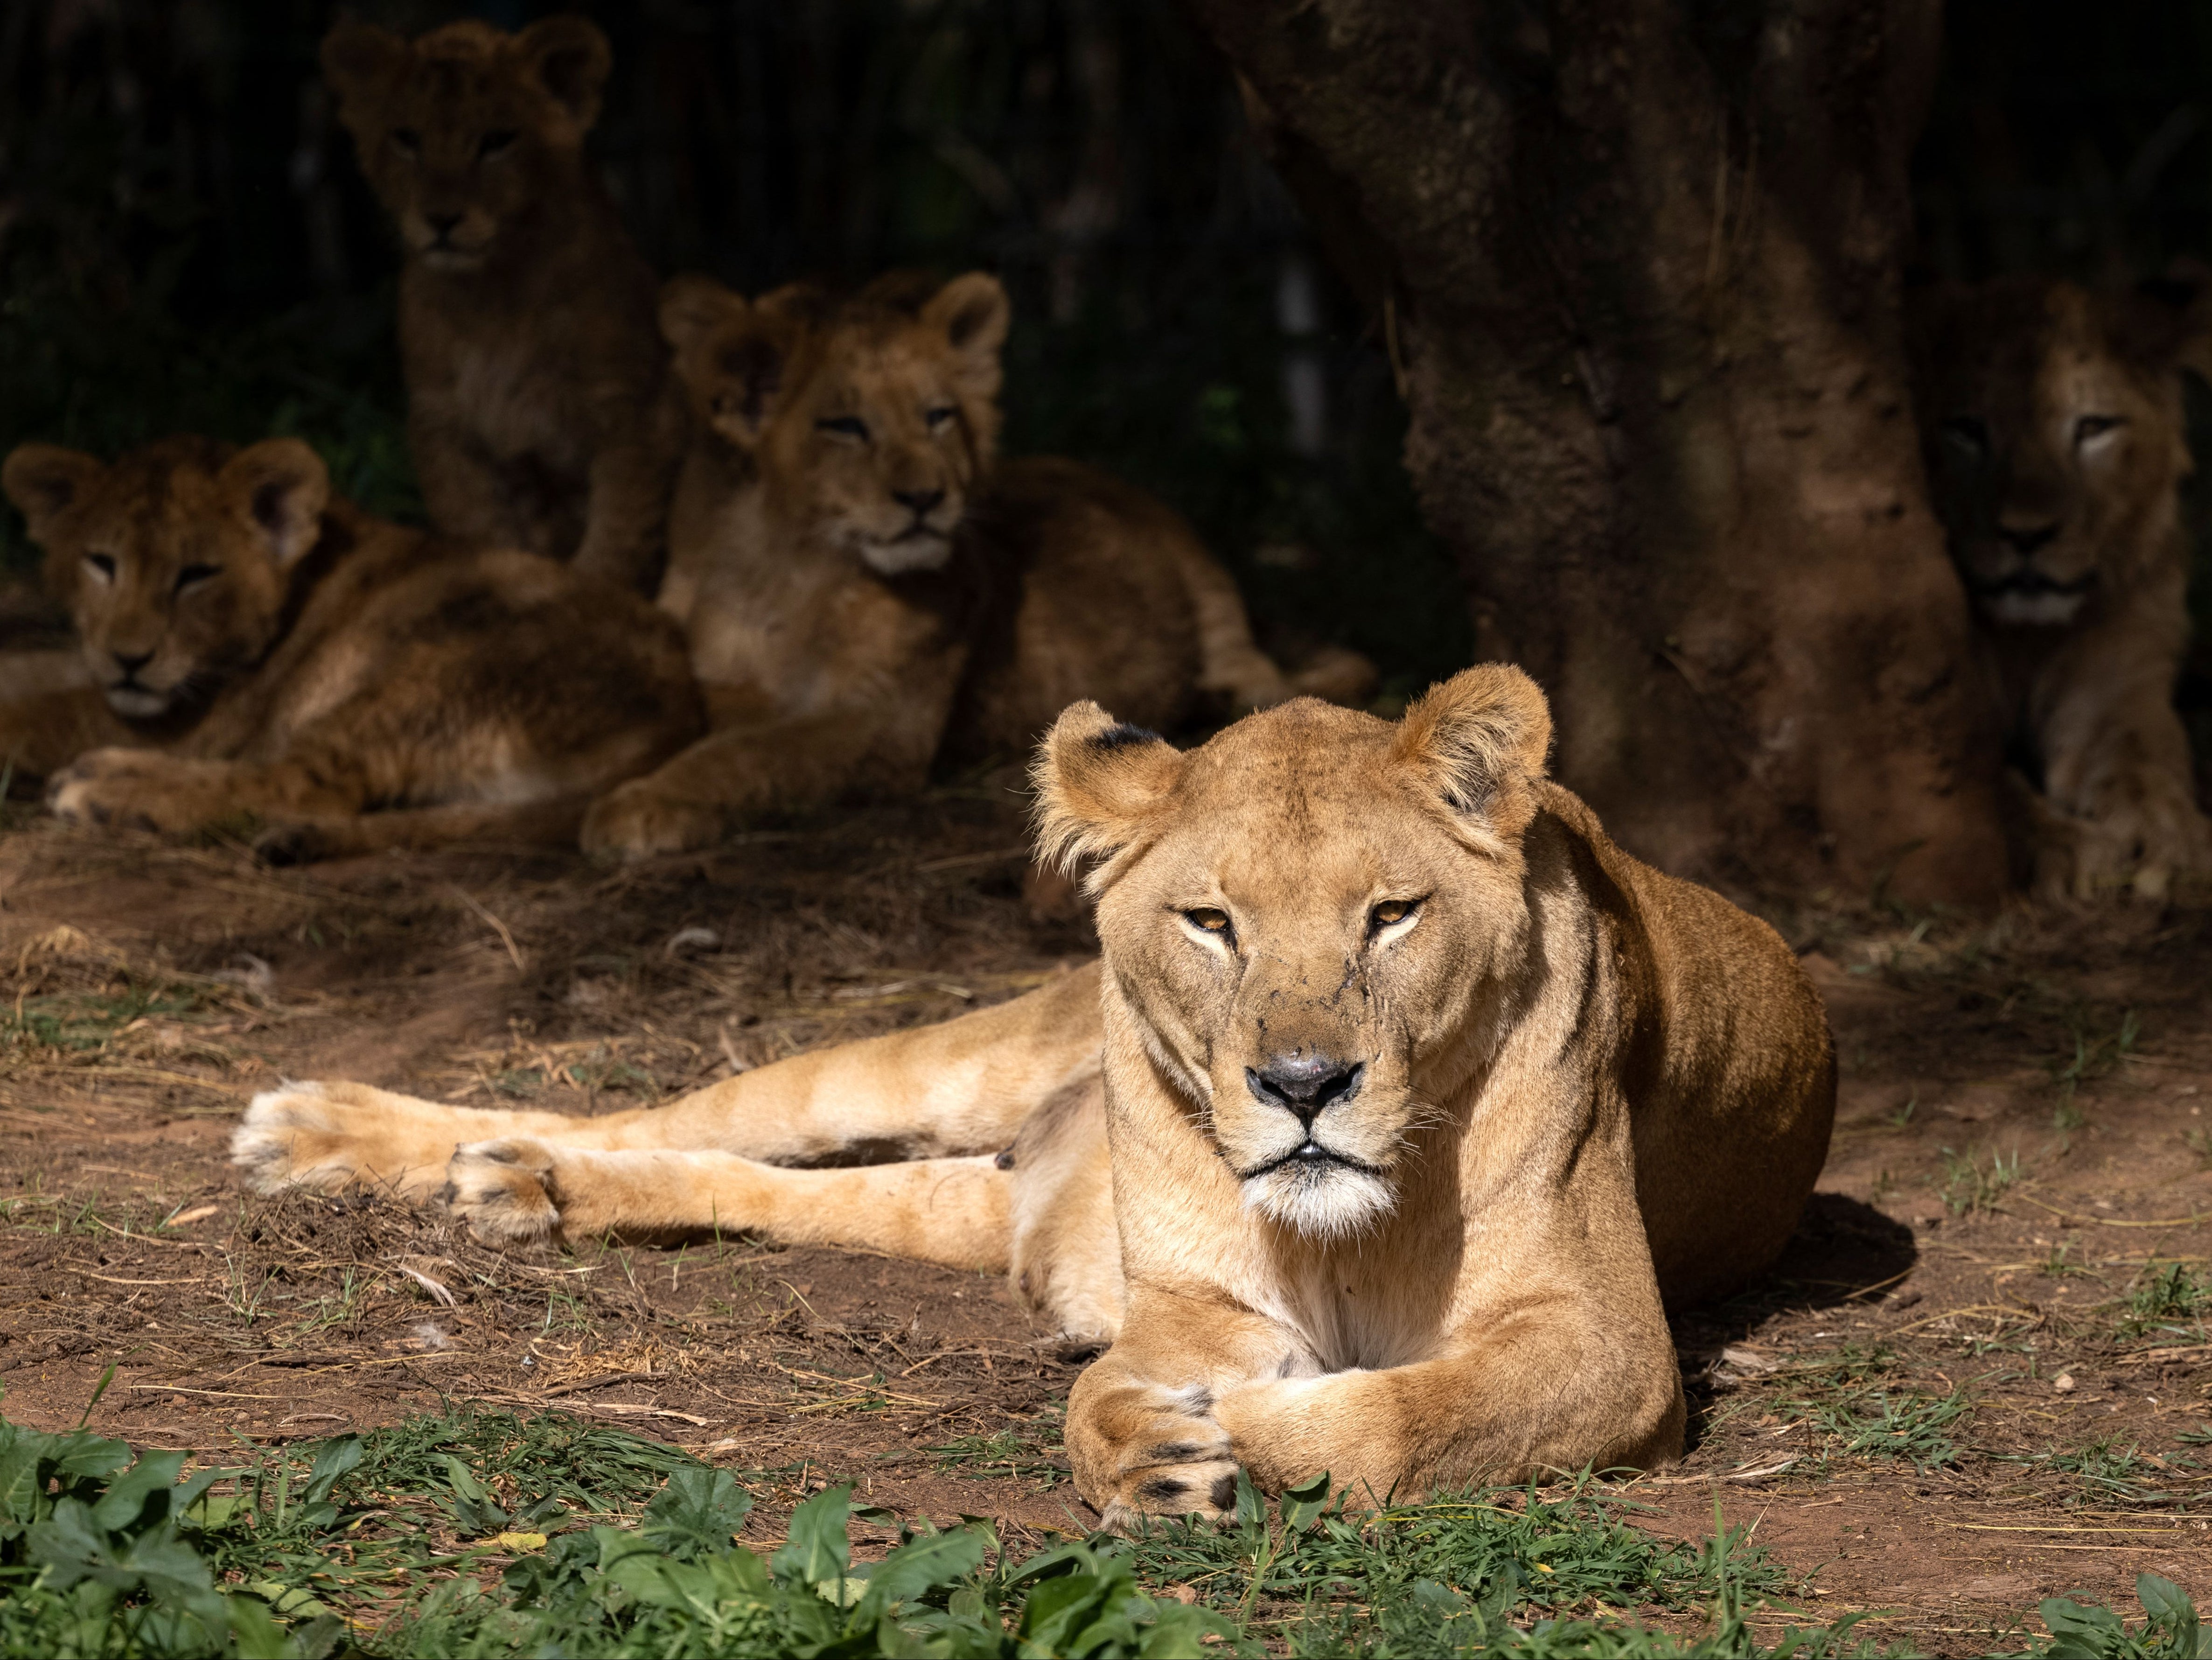 An Indian zoo has been forced to change the ‘blasphemous’ names of two of its lions